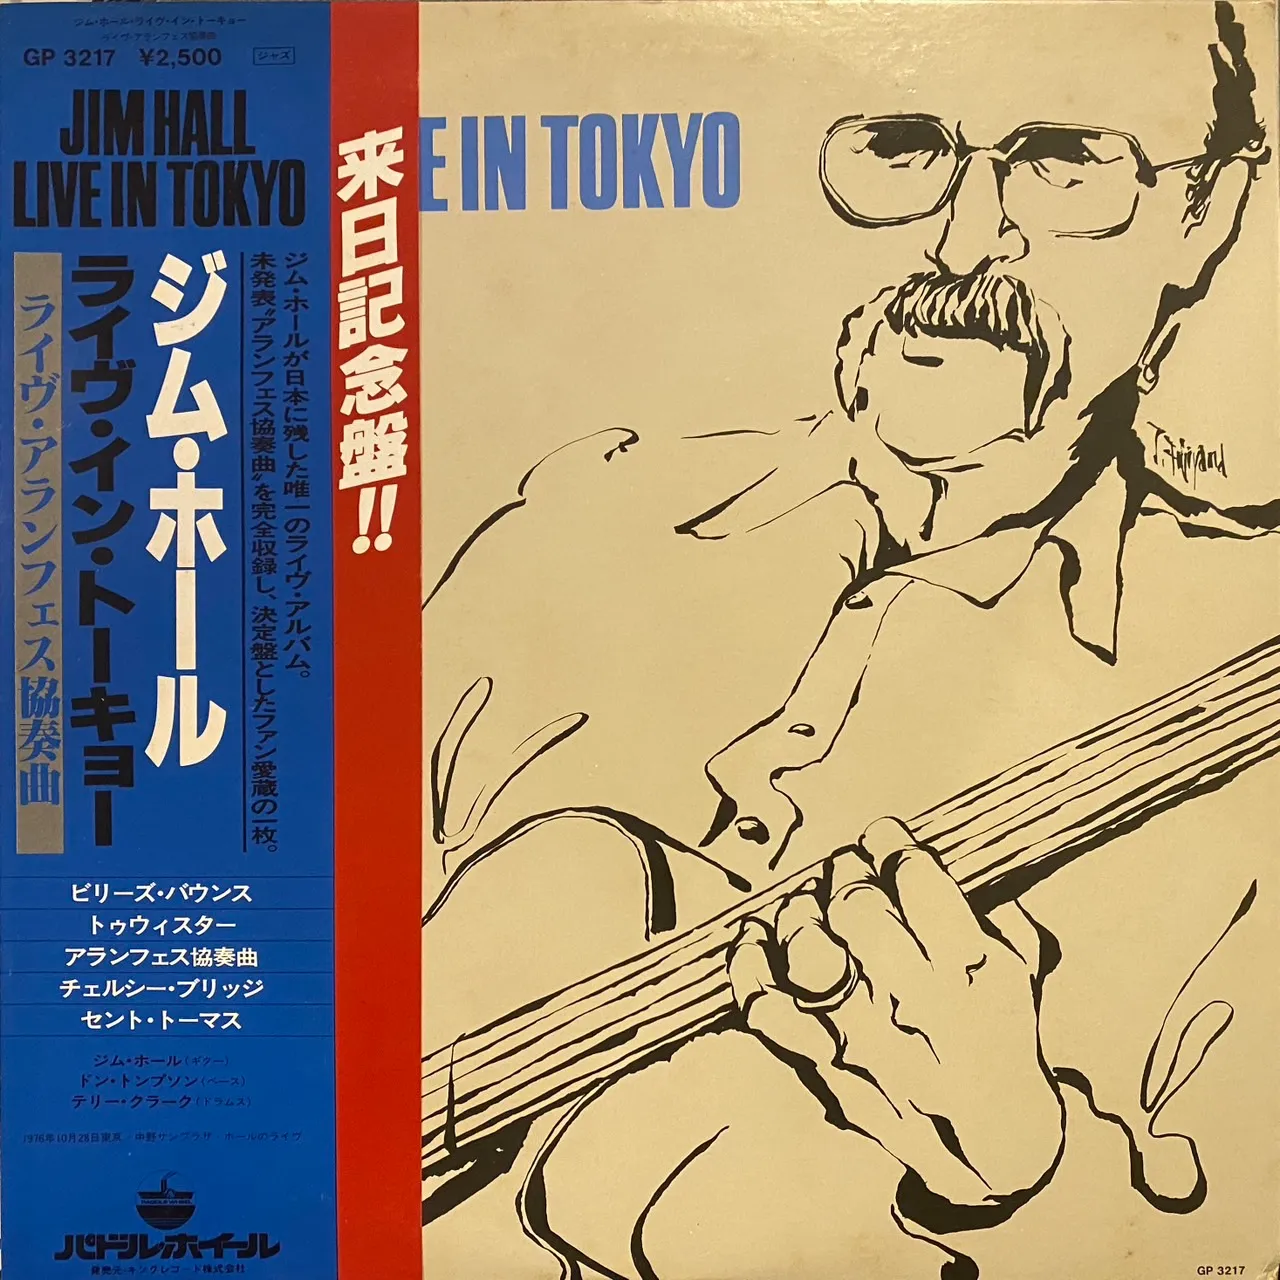 JIM HALL / LIVE IN TOKYO